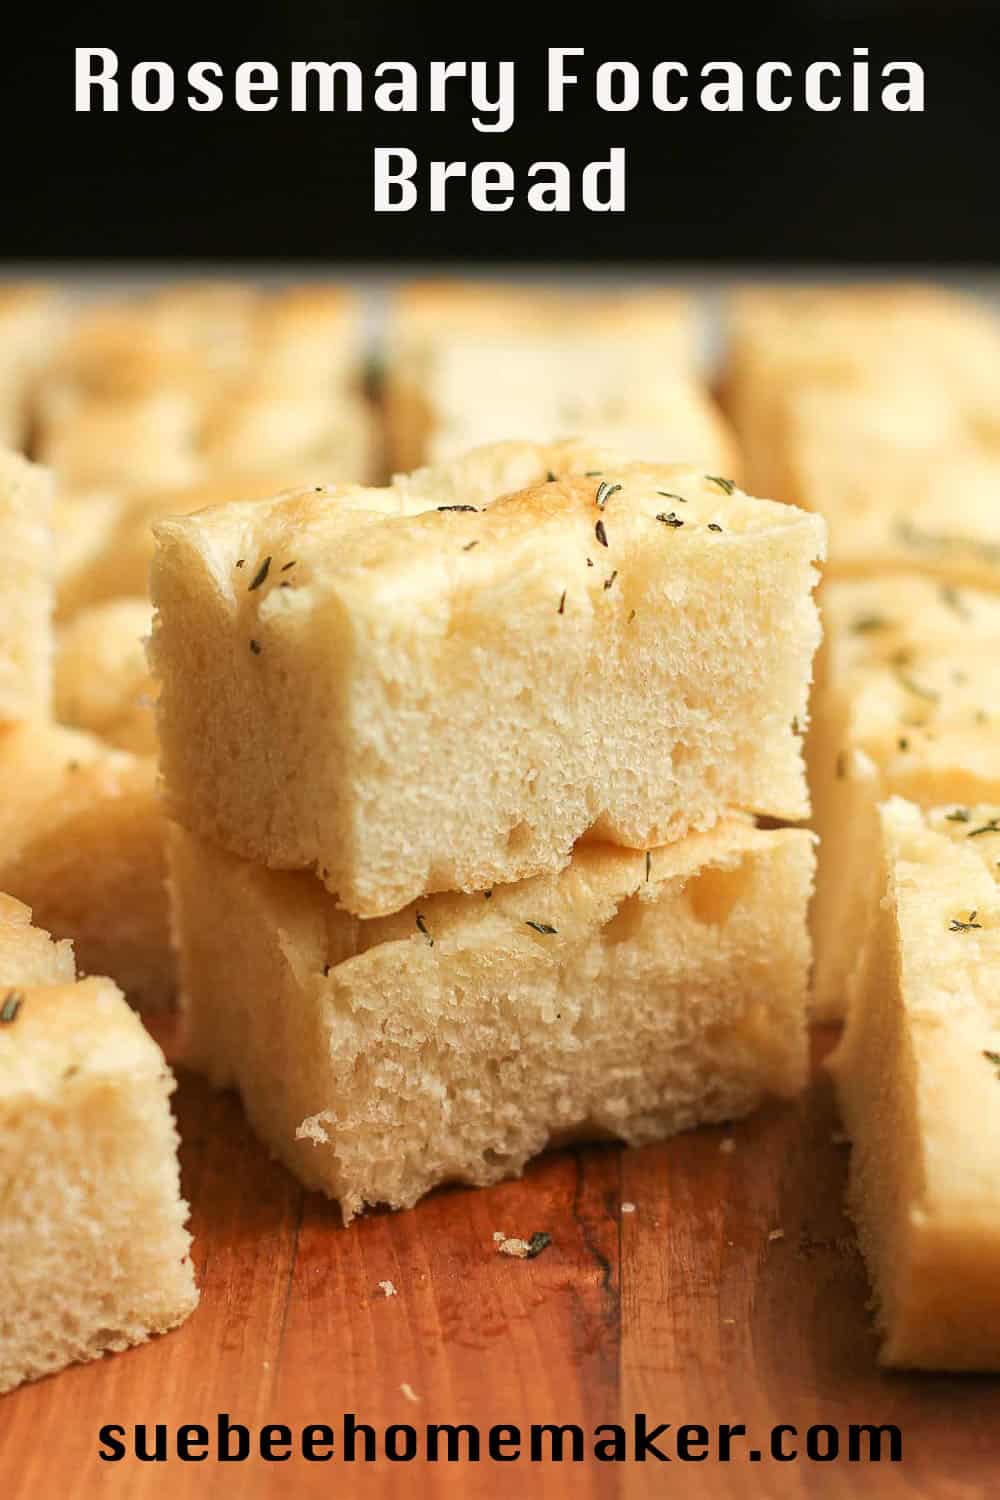 A stack of two pieces of focaccia bread with others around it.